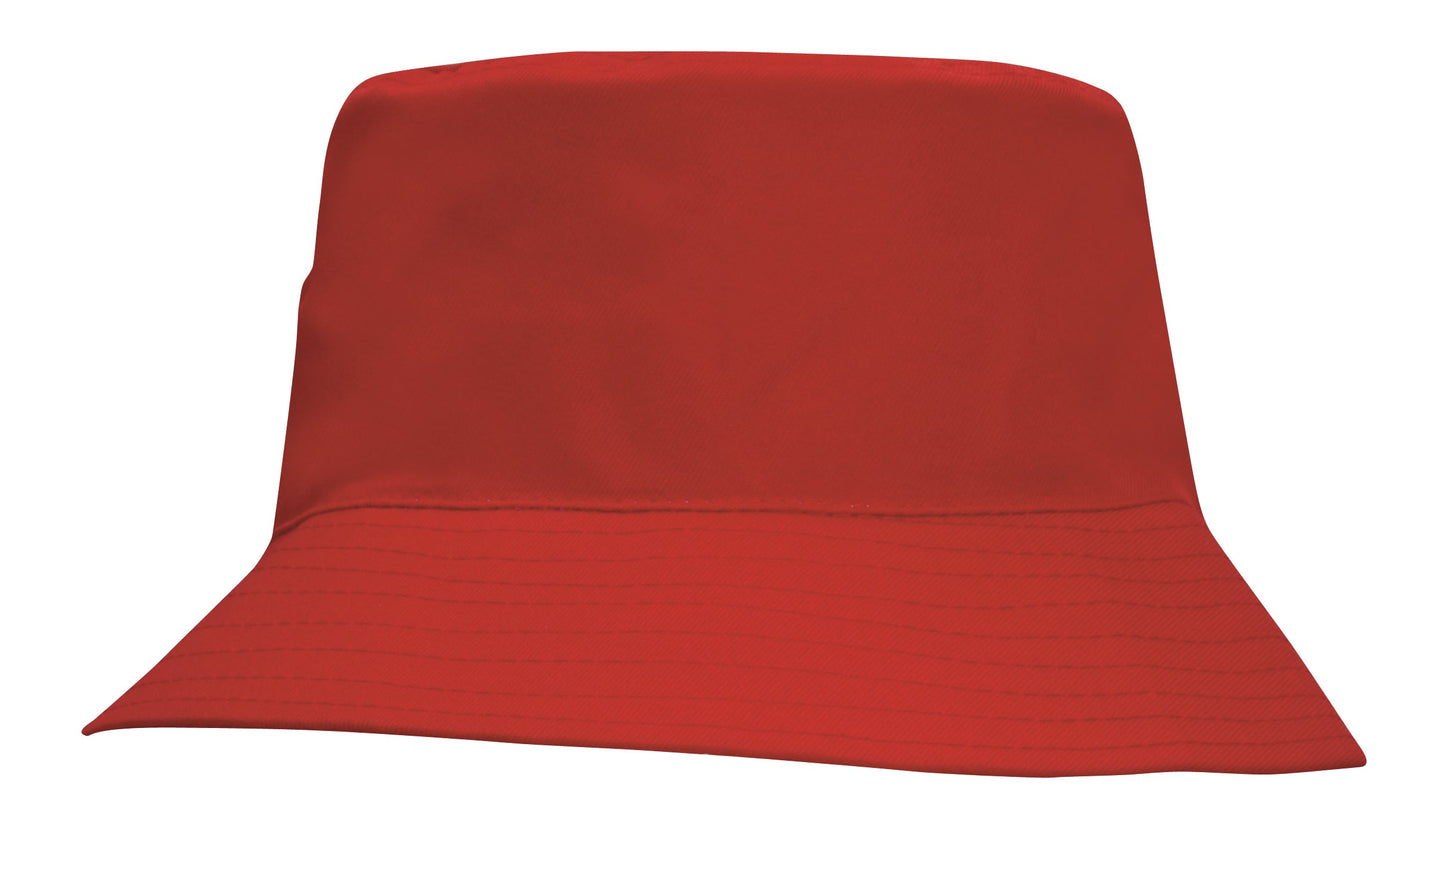 Headwear Breathable Poly Twill Childs Bucket Hat (3939)